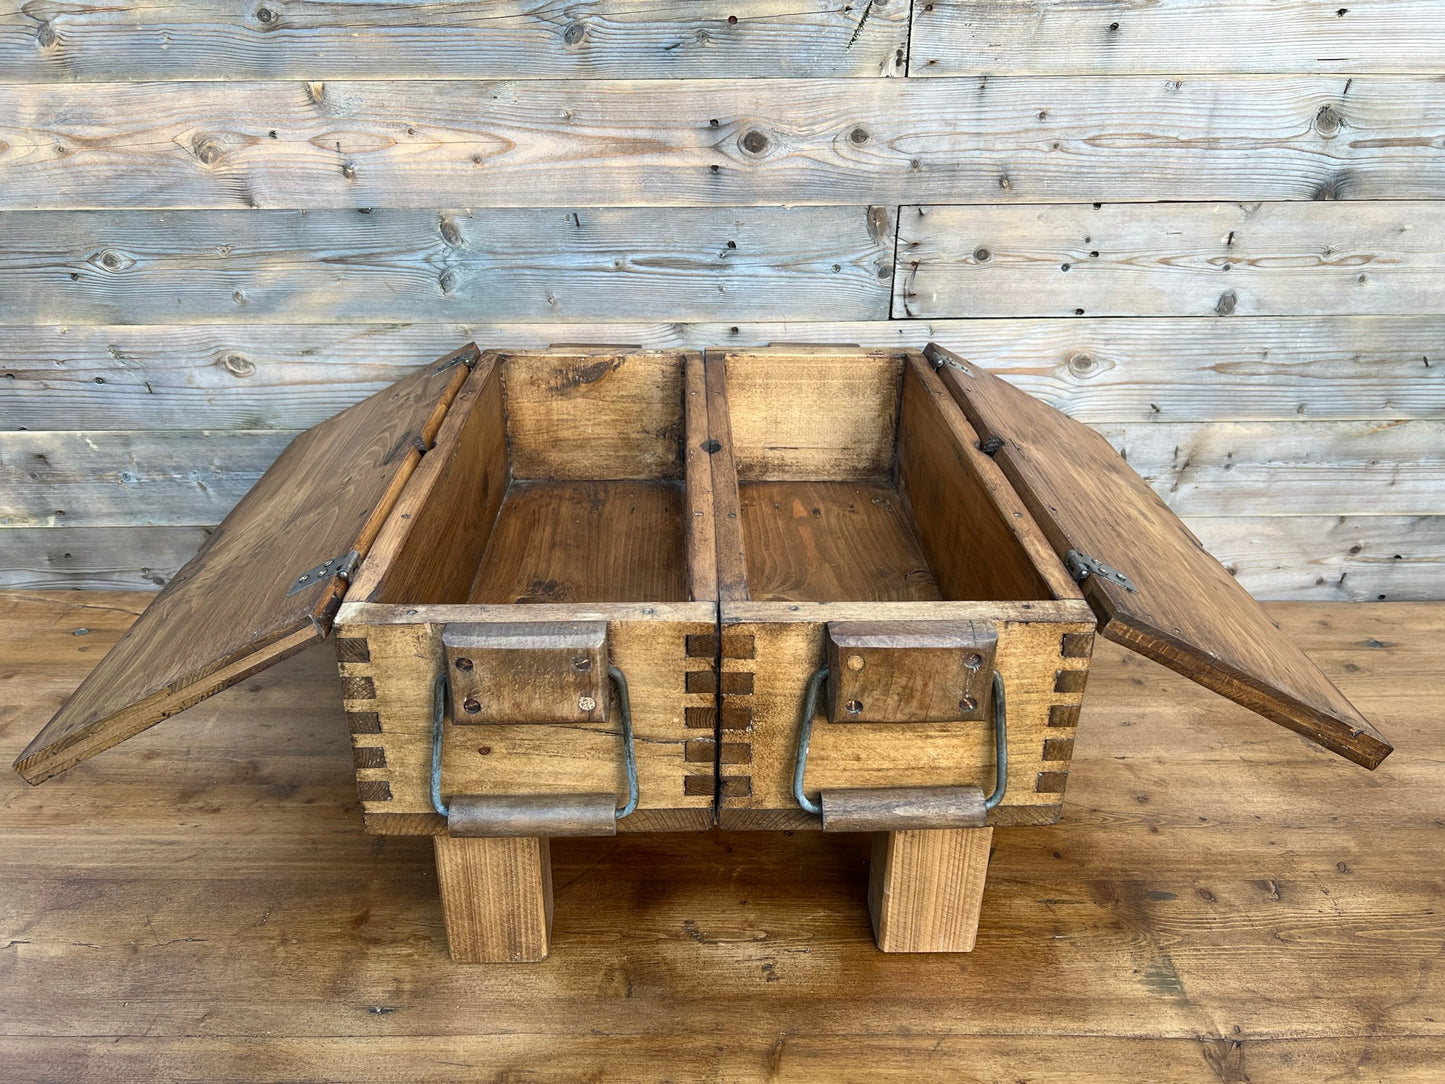 Rustic Wooden Chest Coffee Table With Storage Farmhouse Shabby Chic Side Table